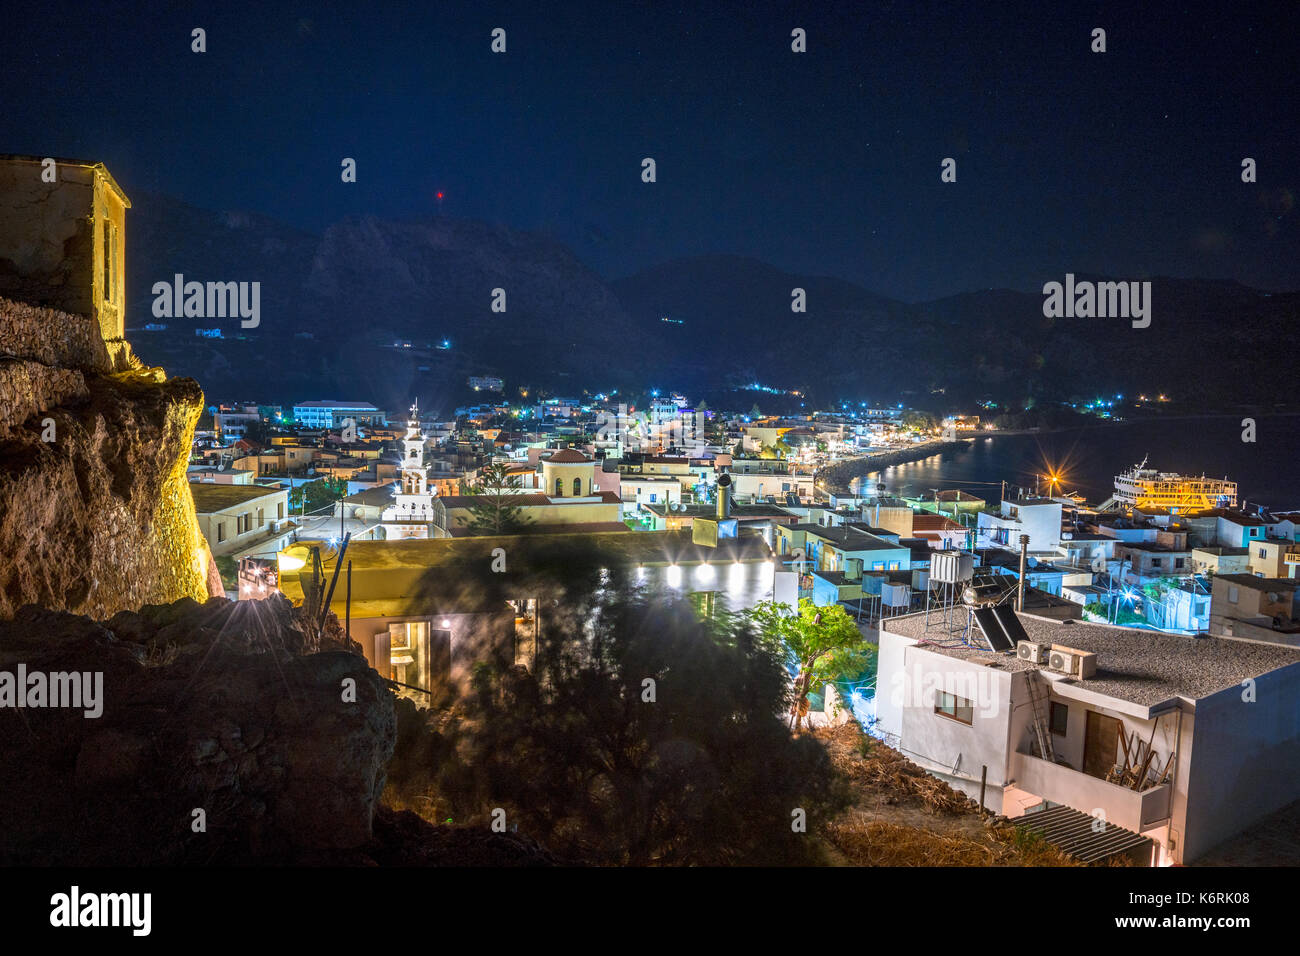 High night view from the castle of traditional village of Paleochora, Crete, Greece. Stock Photo